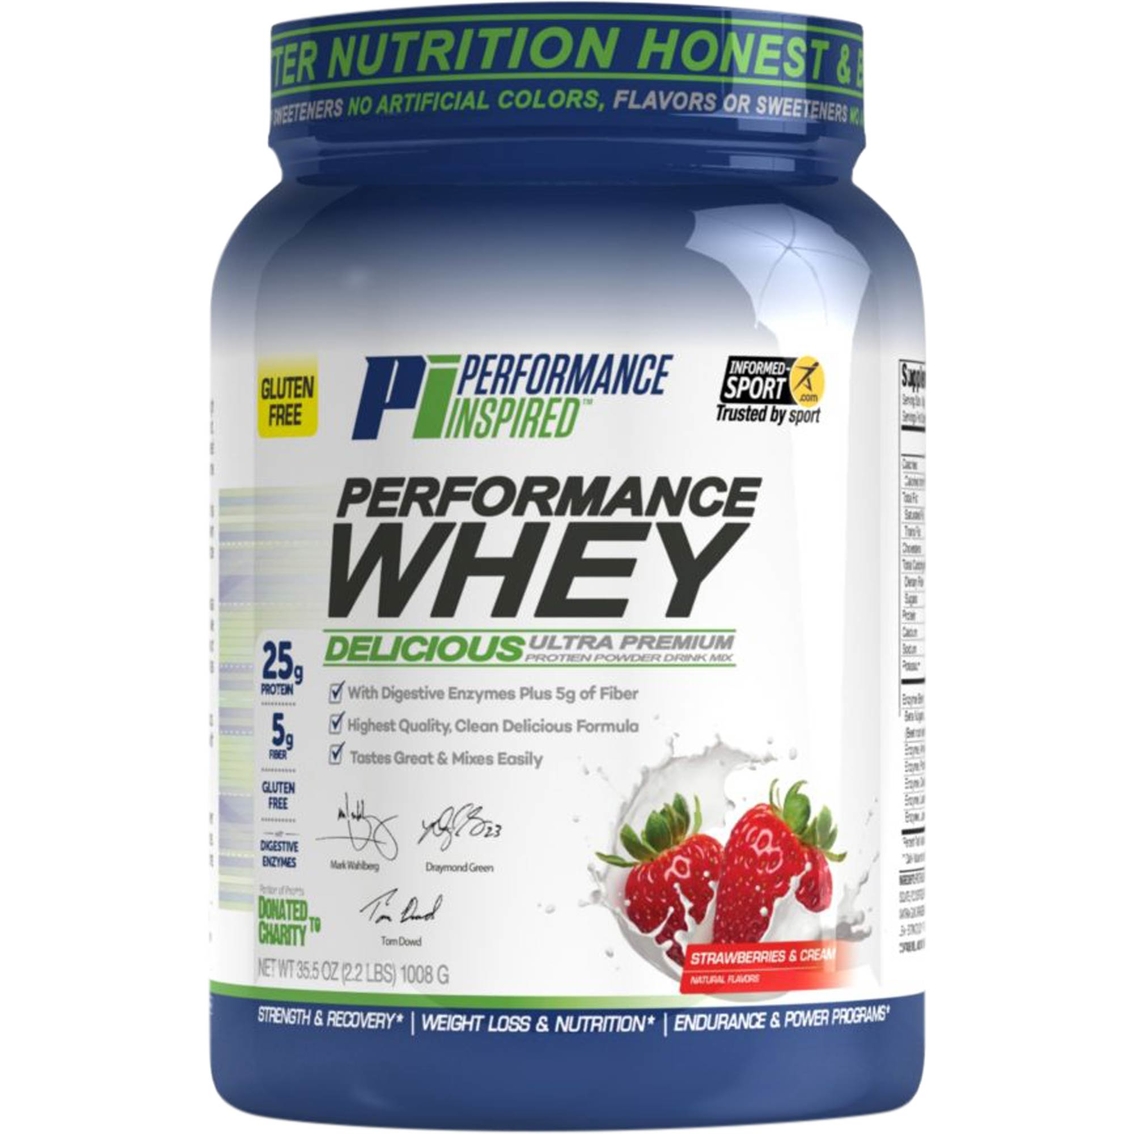 Performance Inspired Strawberries N' Cream Performance Whey Protein Powder, 2 lb. - Image 1 of 2